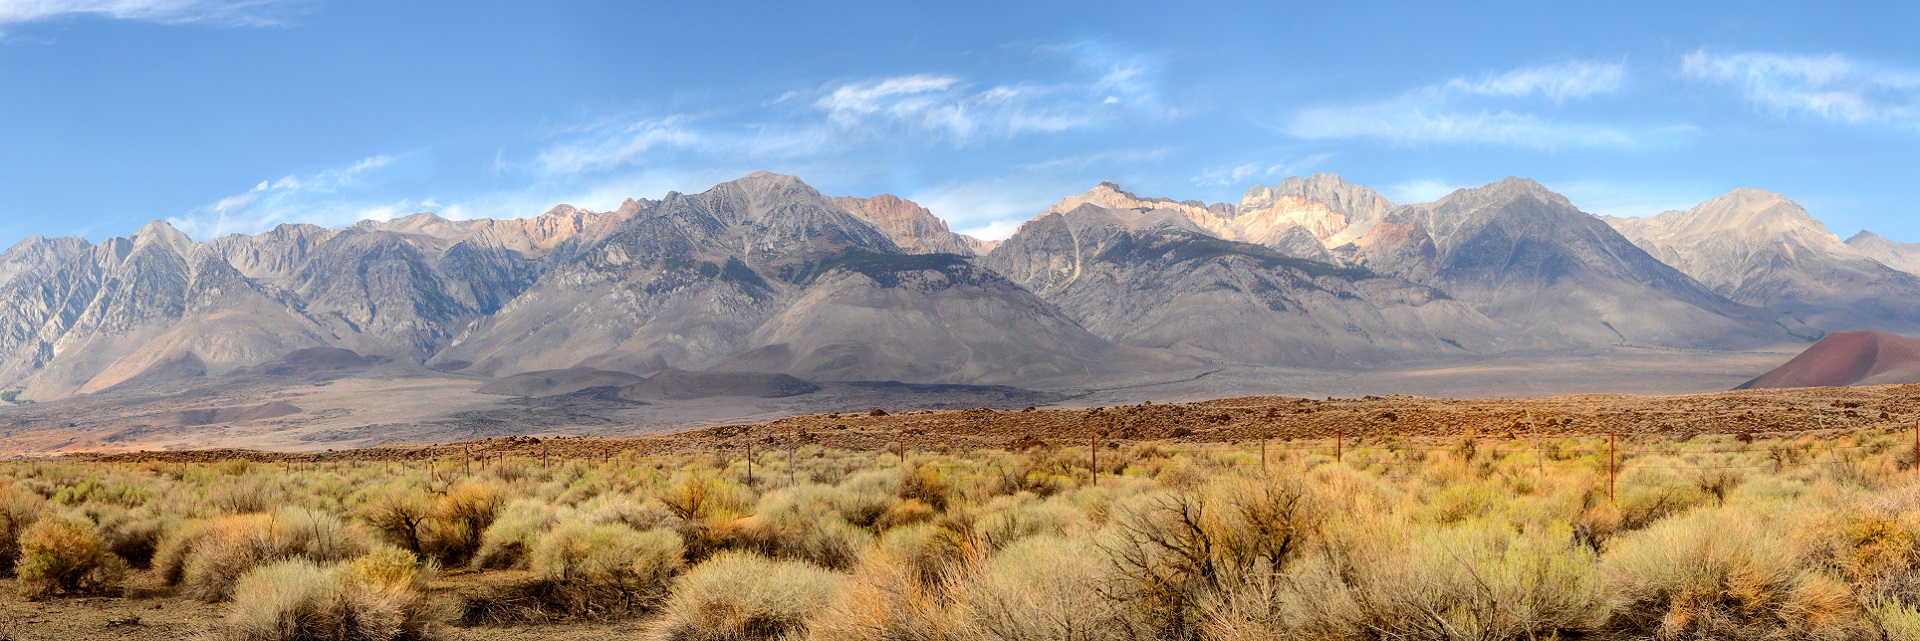 Panorama of the southern tip of the Sierra Nevada Mountains